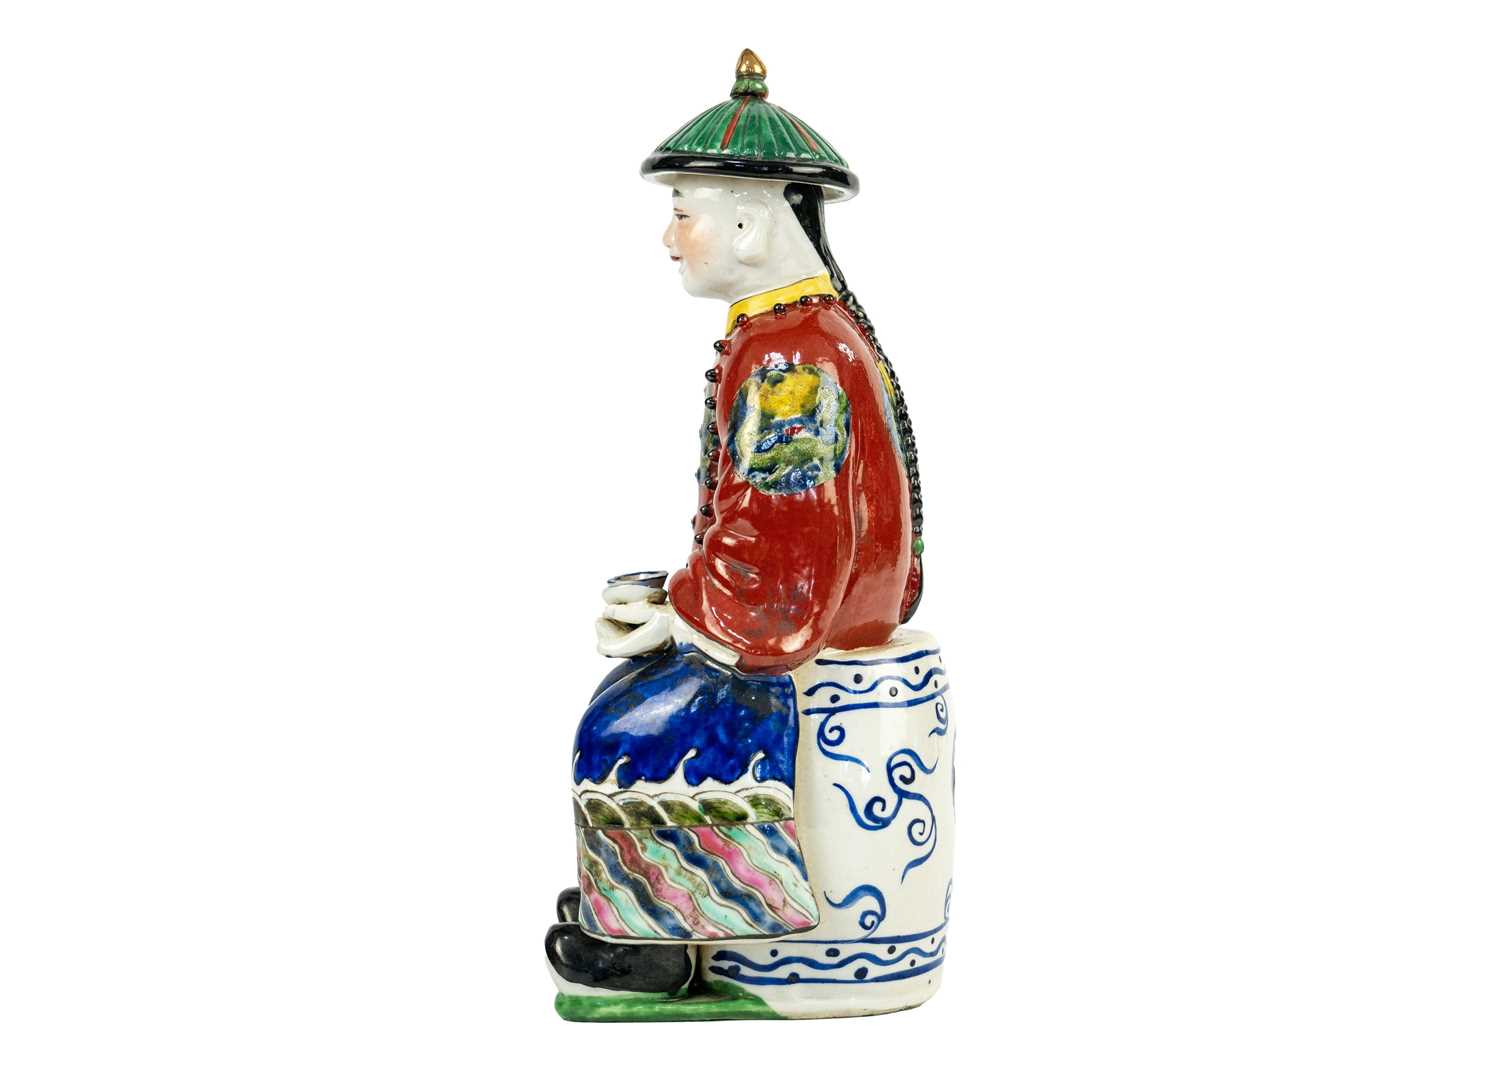 A Chinese porcelain figure of a seated Emperor, 20th century. - Image 4 of 8